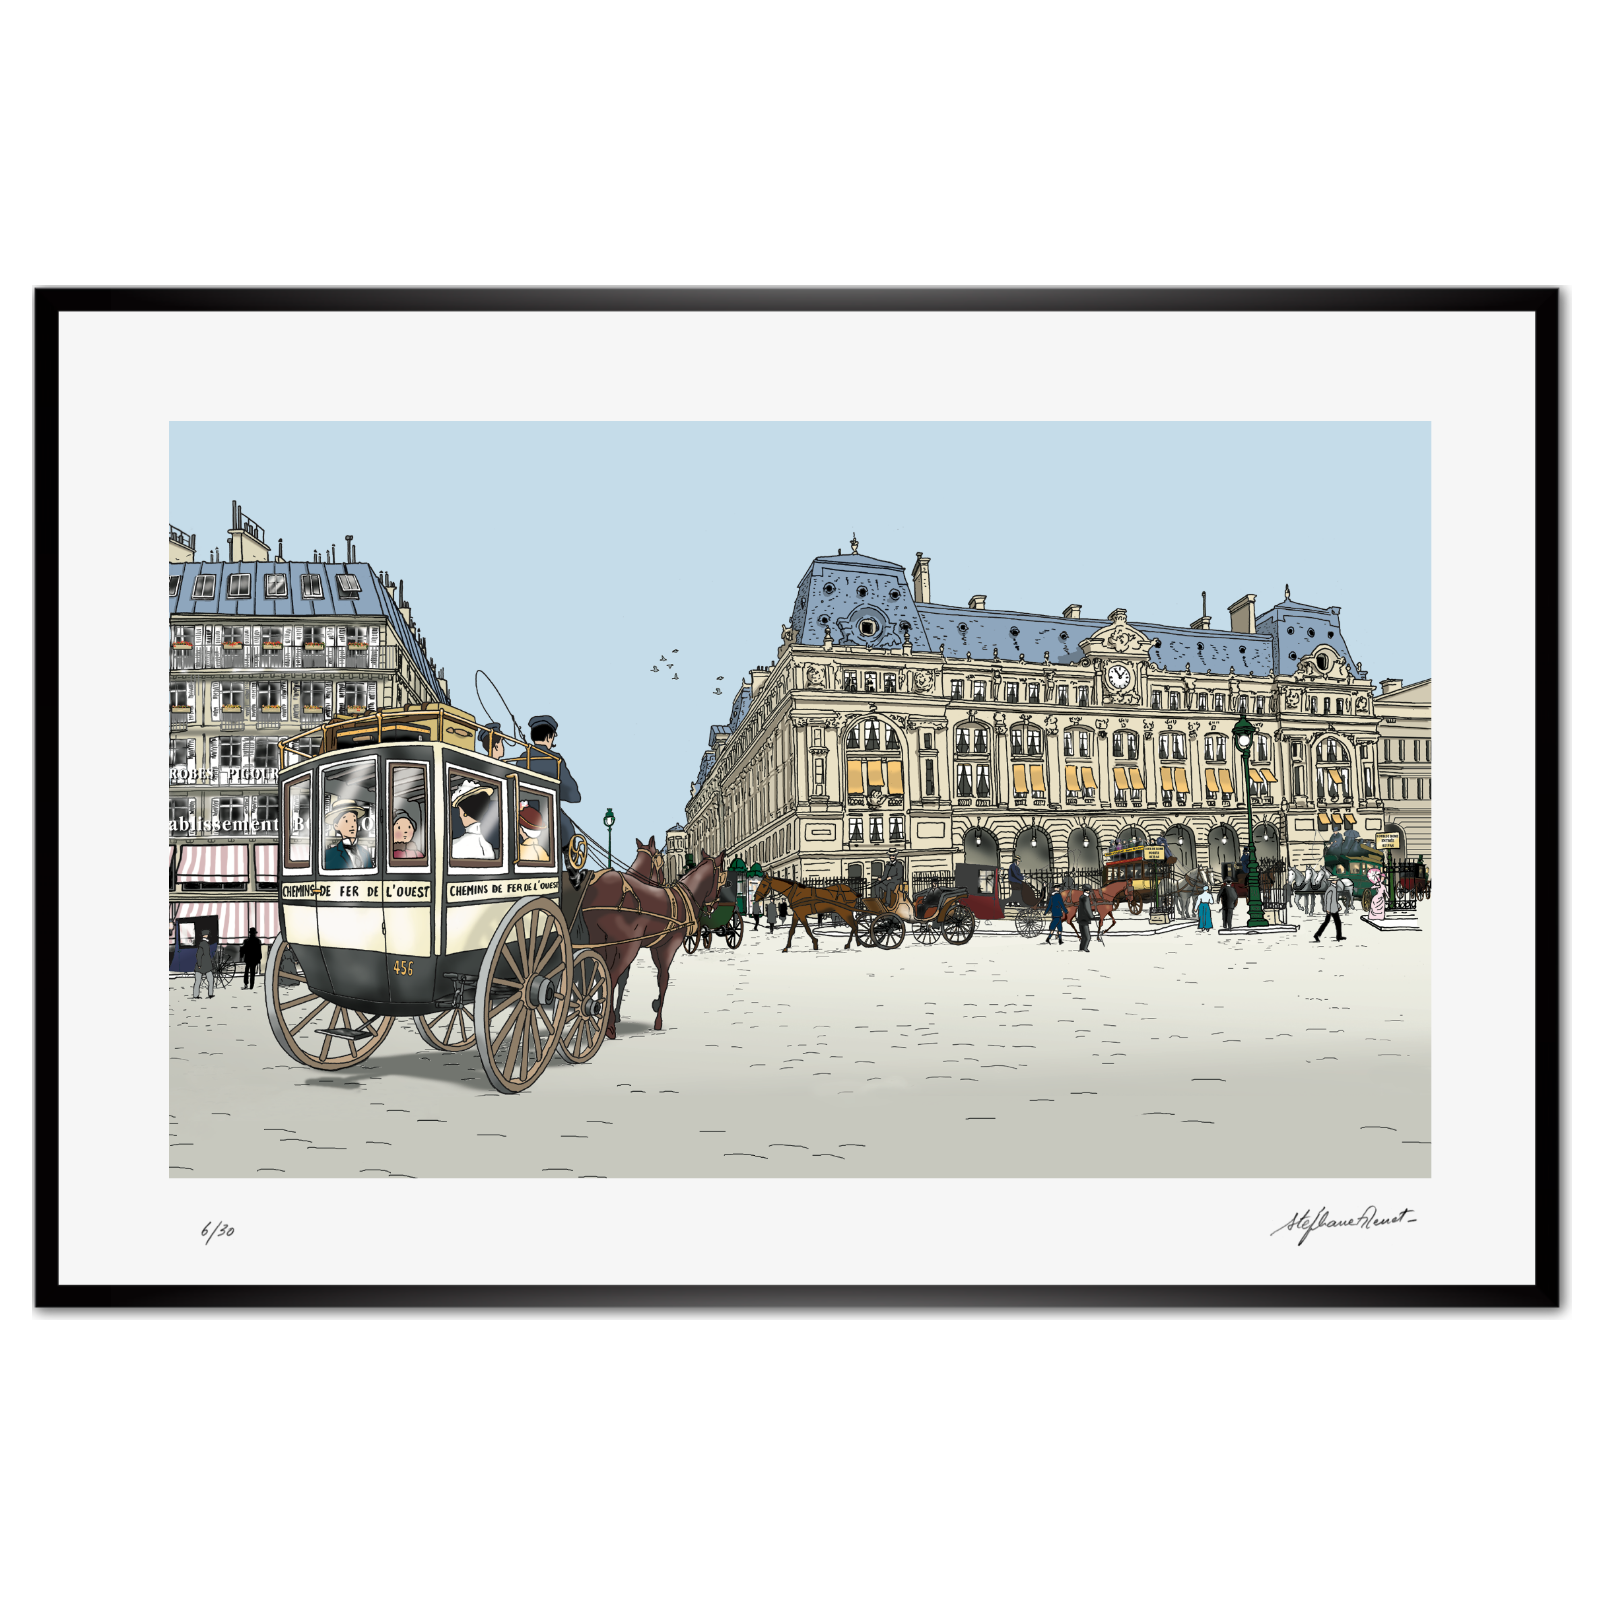 Saint-Lazare station in Paris. Print by Stéphane Heuet. Illustration of Within a Budding Grove by Marcel Proust.